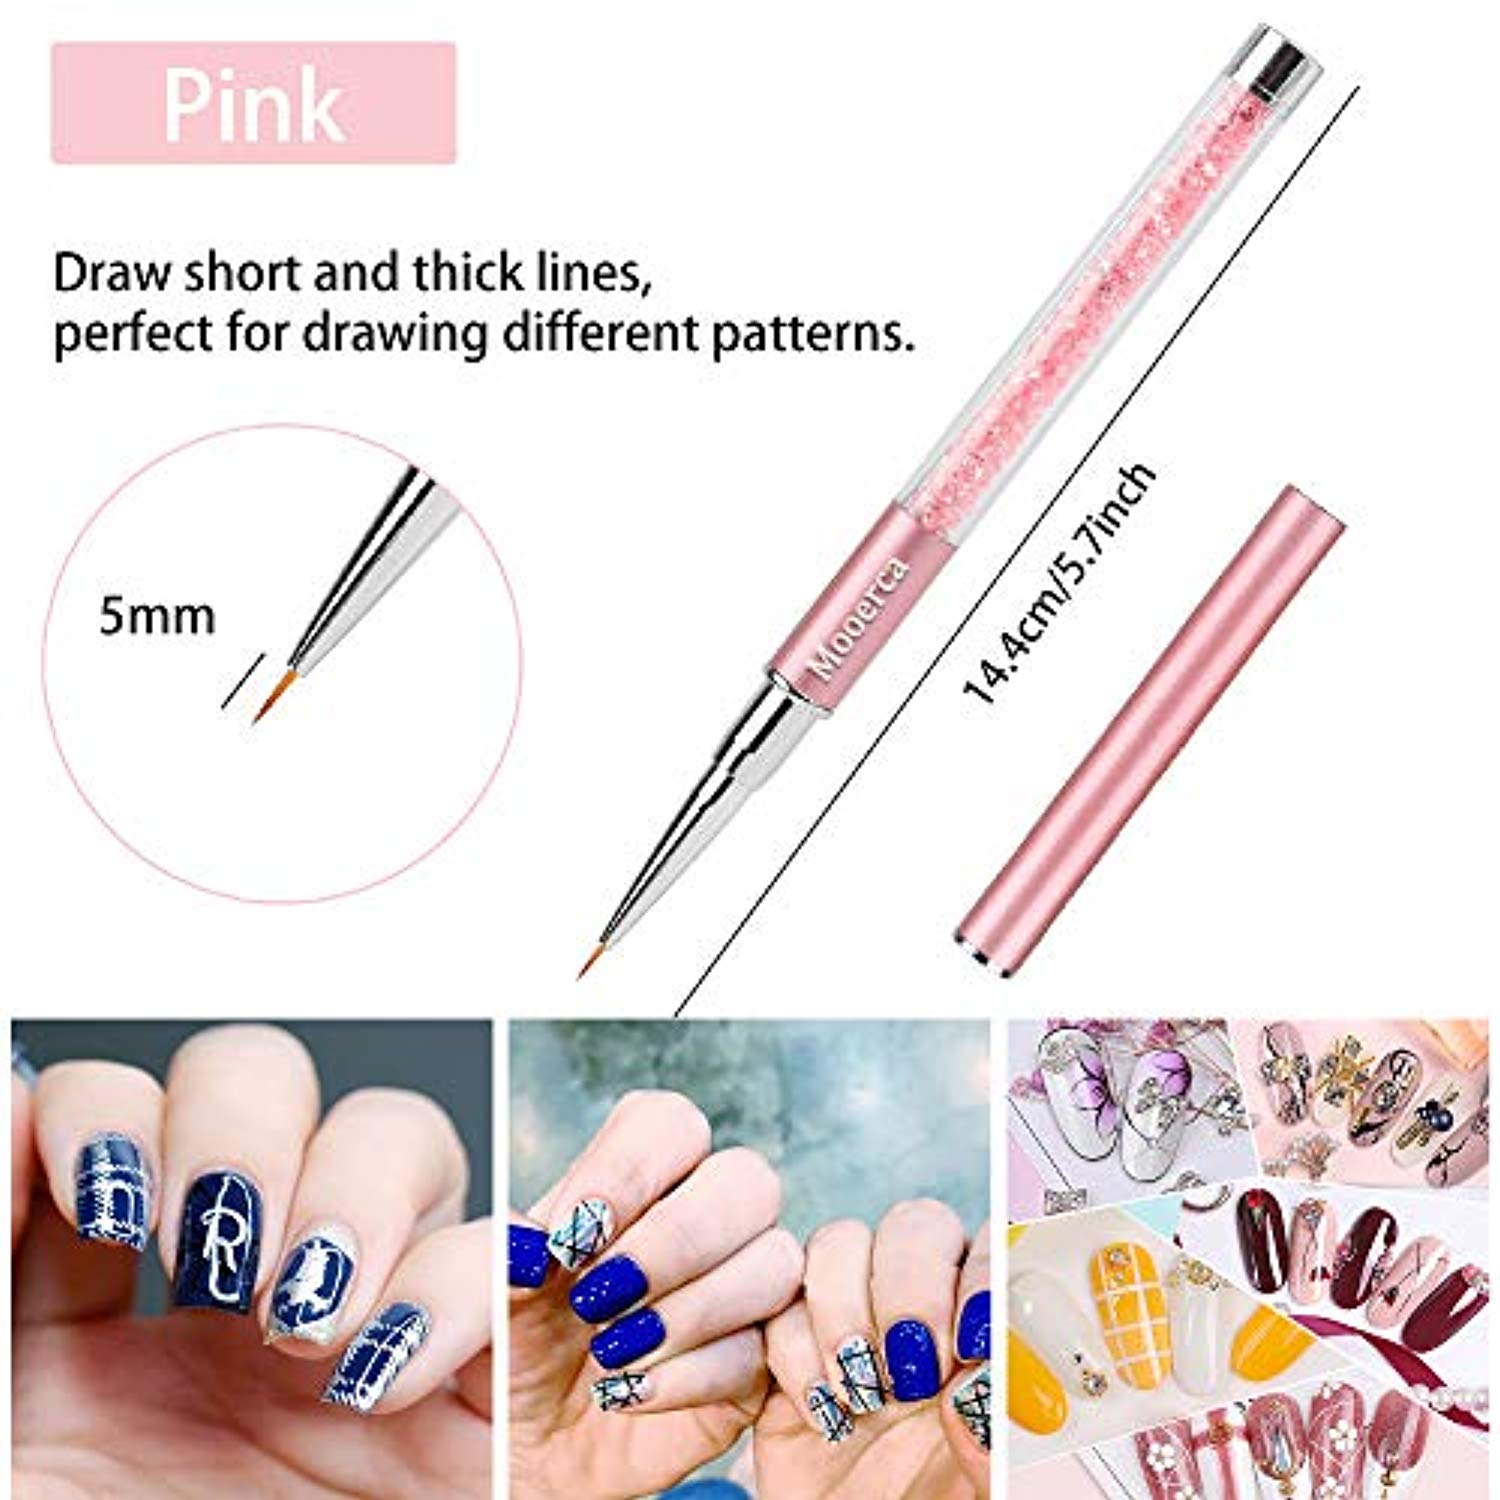 D.B.Z. ® Nail Art Tools for Learners & Professional combo - Price in India,  Buy D.B.Z. ® Nail Art Tools for Learners & Professional combo Online In  India, Reviews, Ratings & Features | Flipkart.com